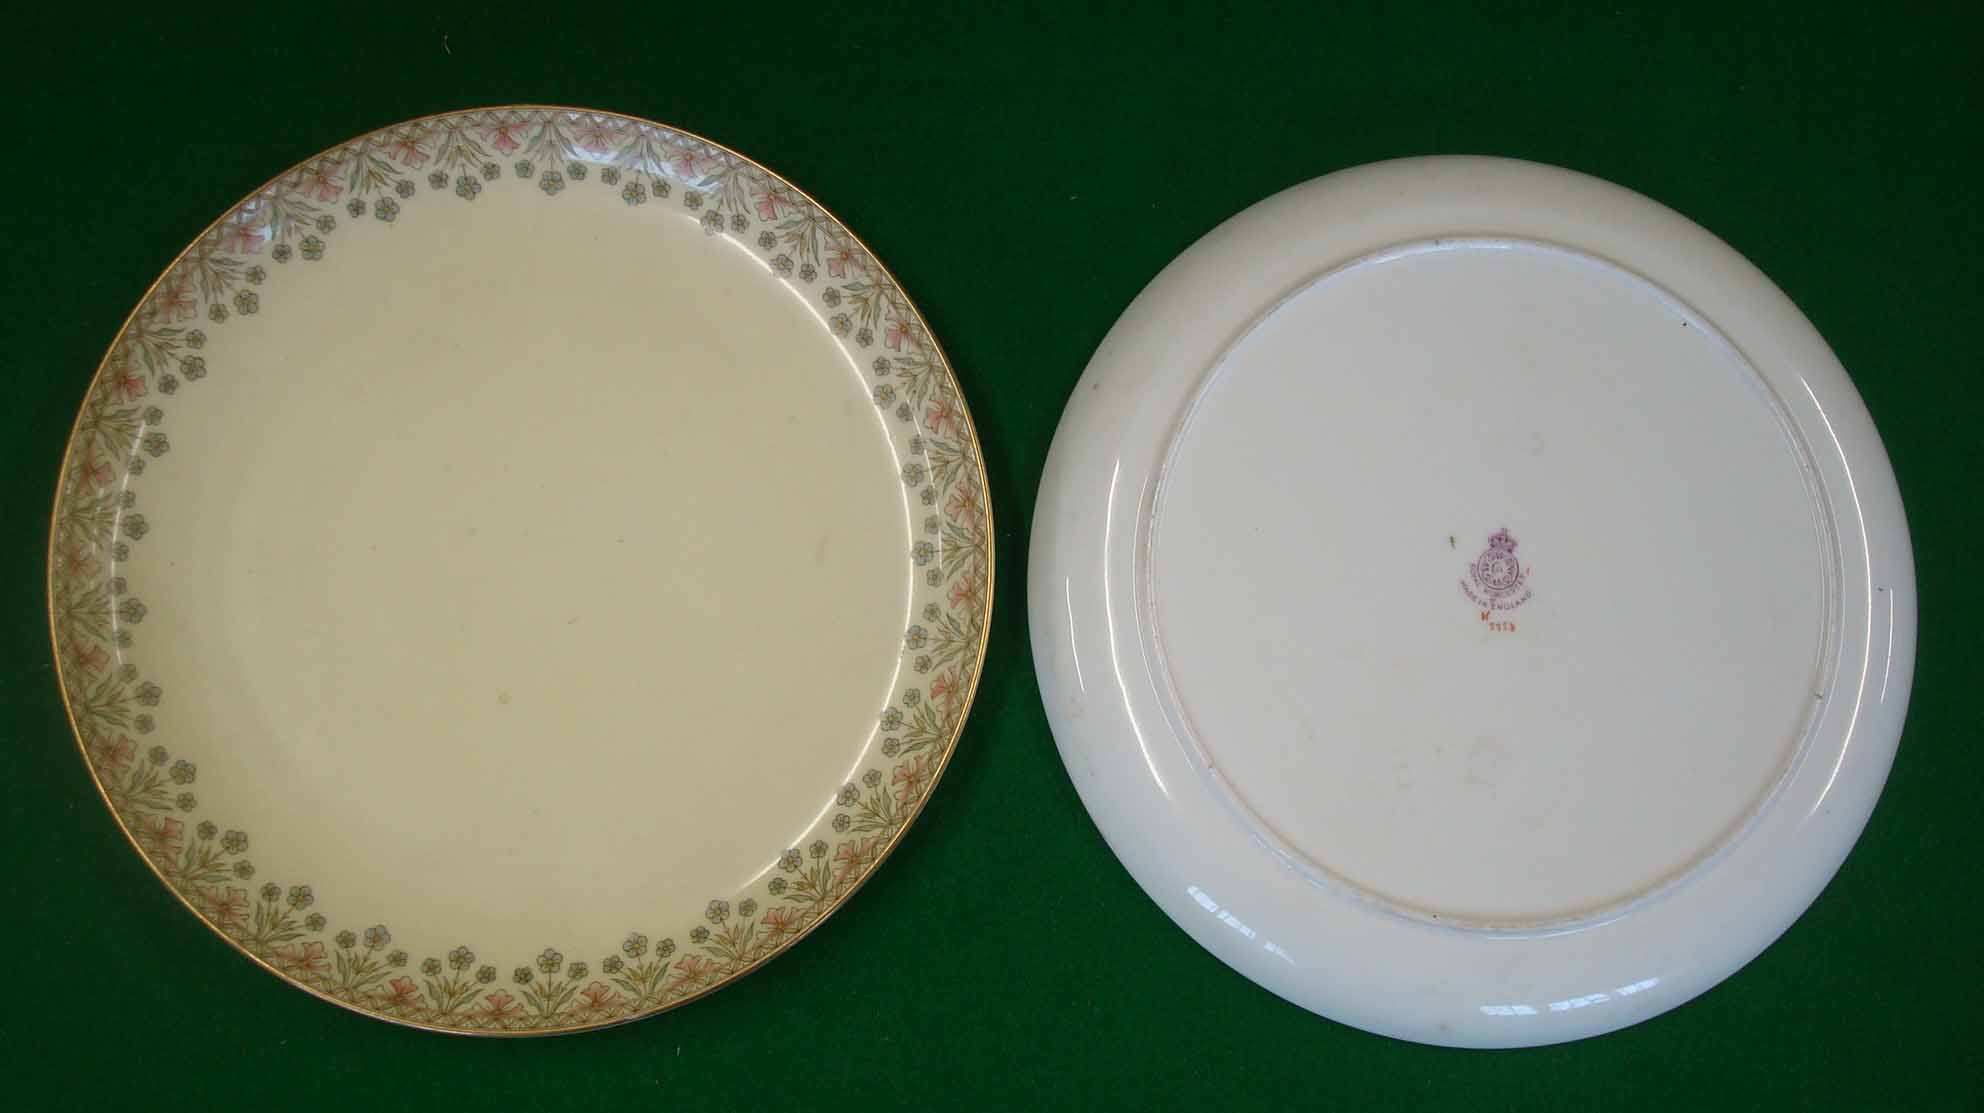 2 Early 20th Century Royal Worcester Pottery Plates: Both having floral design borders with lilac